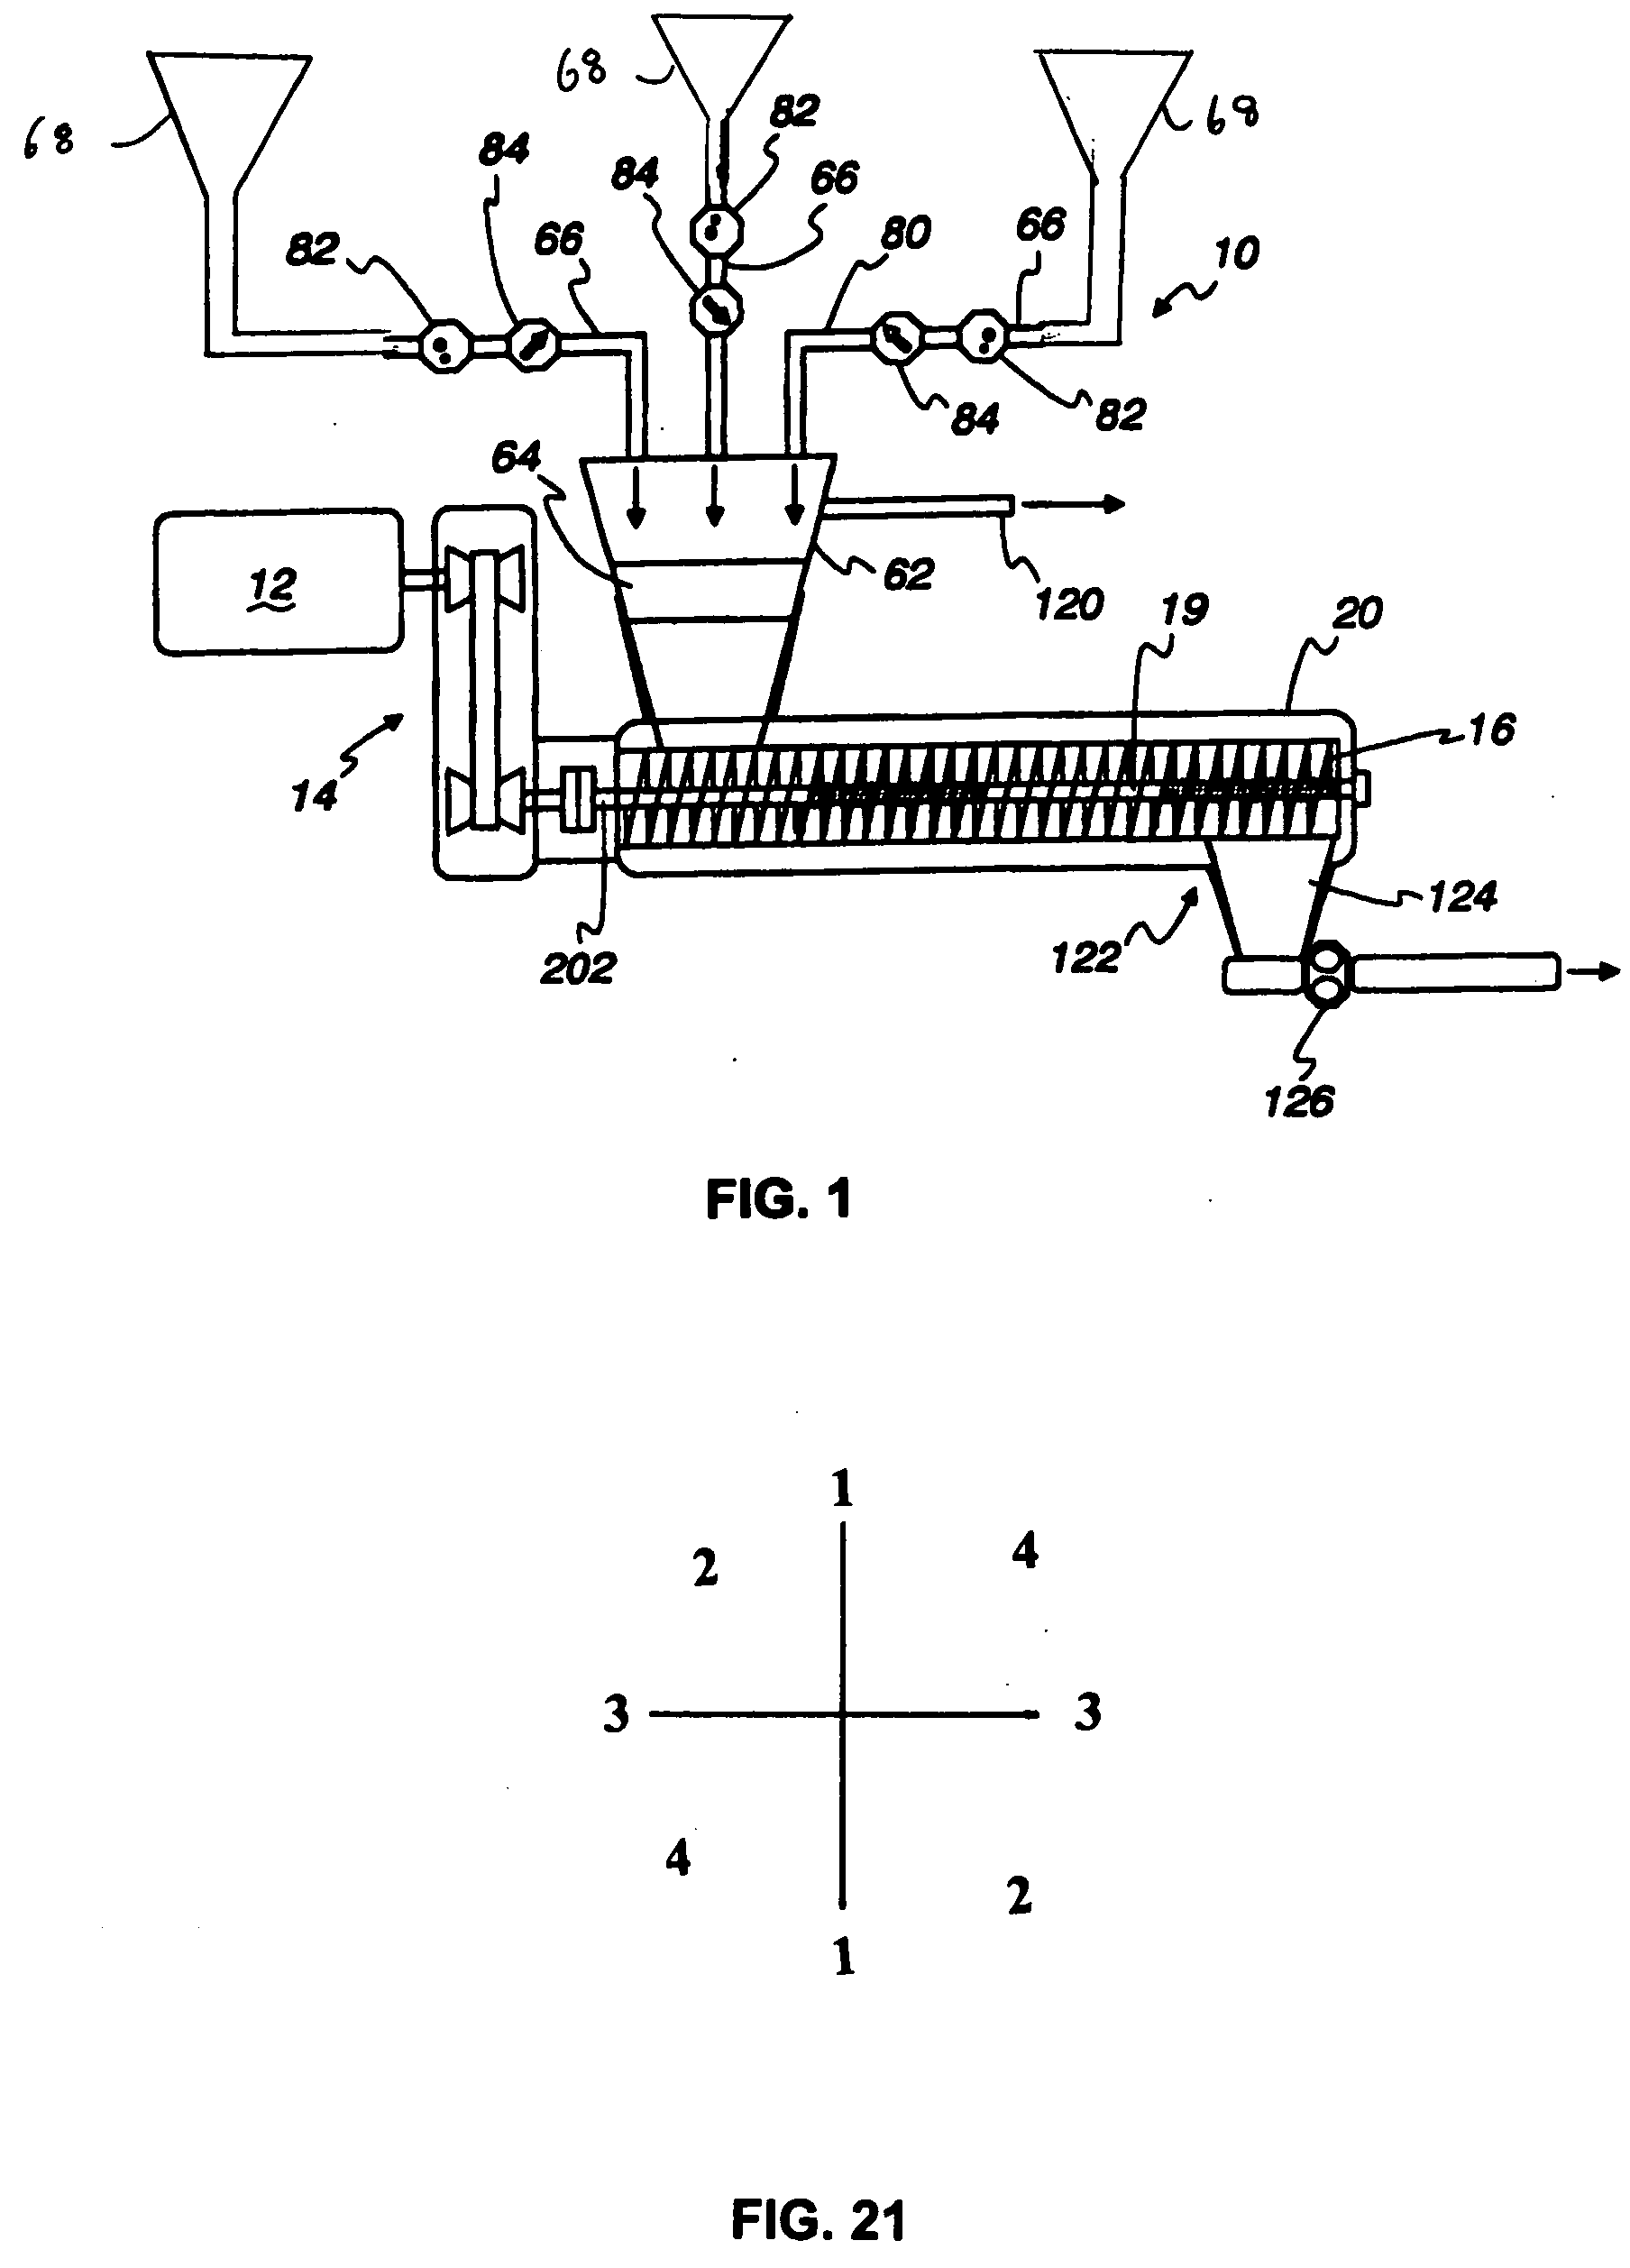 Integrated continuous meat processing system